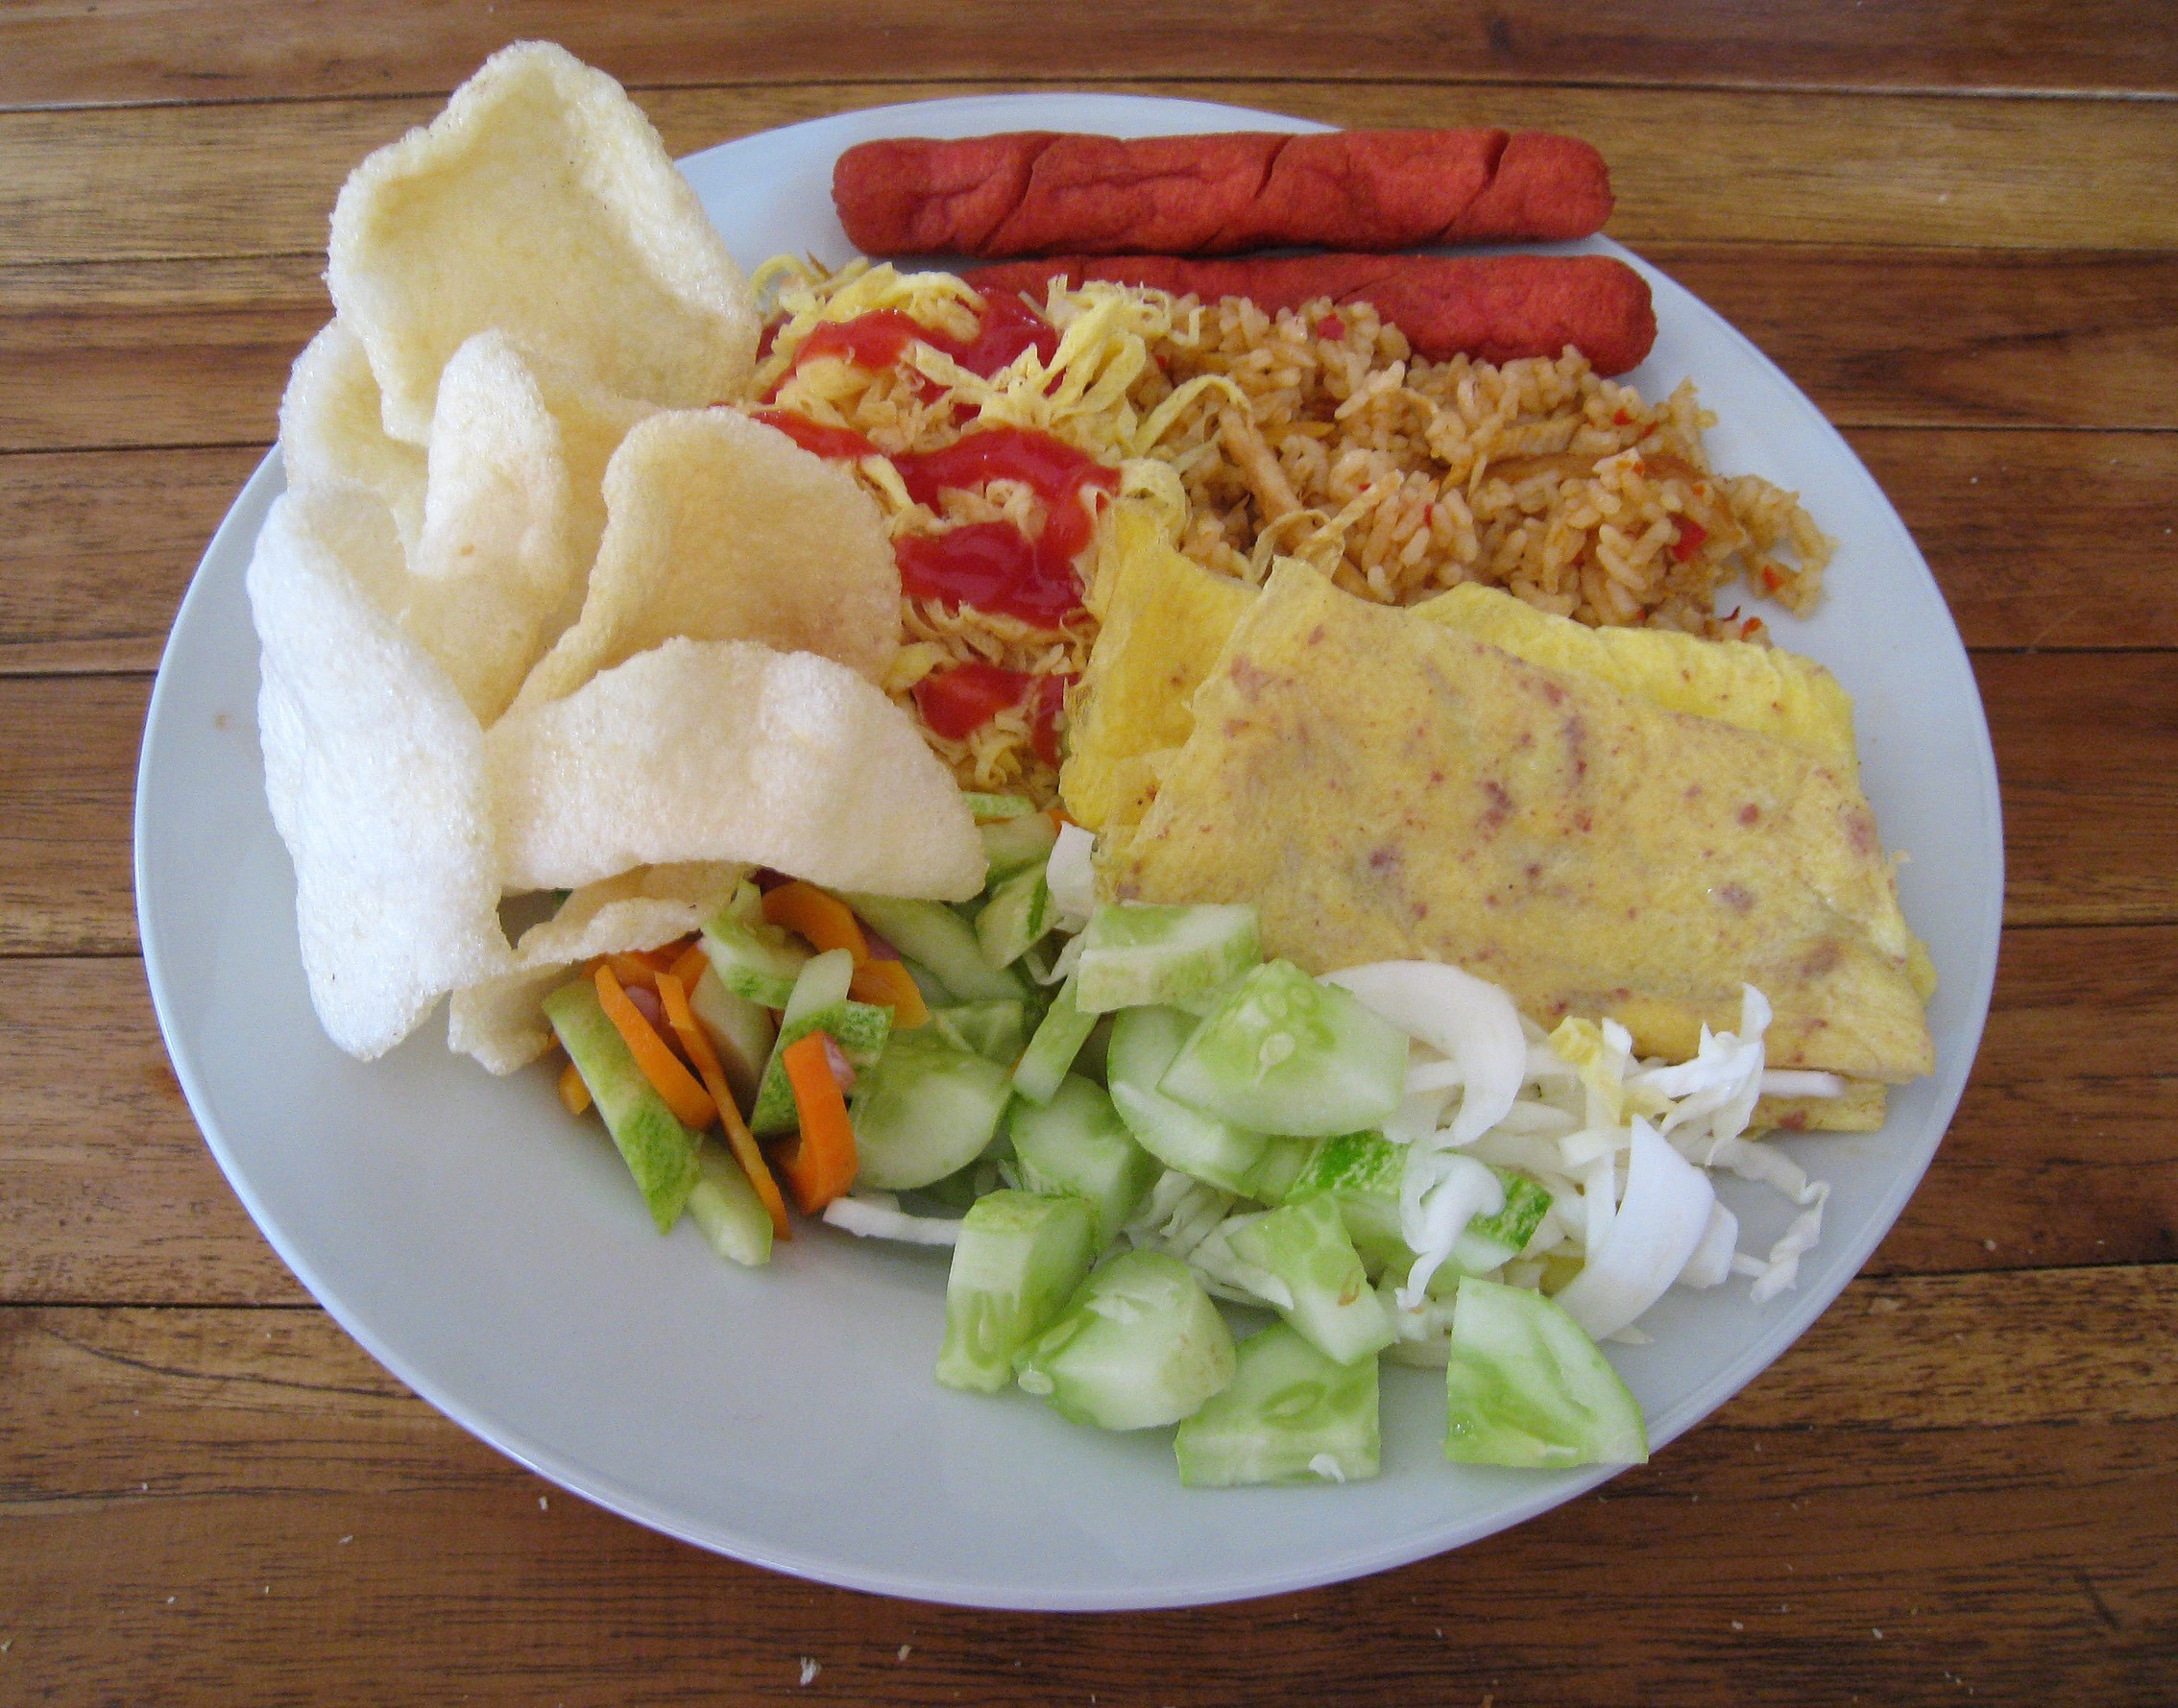 cutted vegetables, fried rice, hotdogs, omelette egg and fried crackers